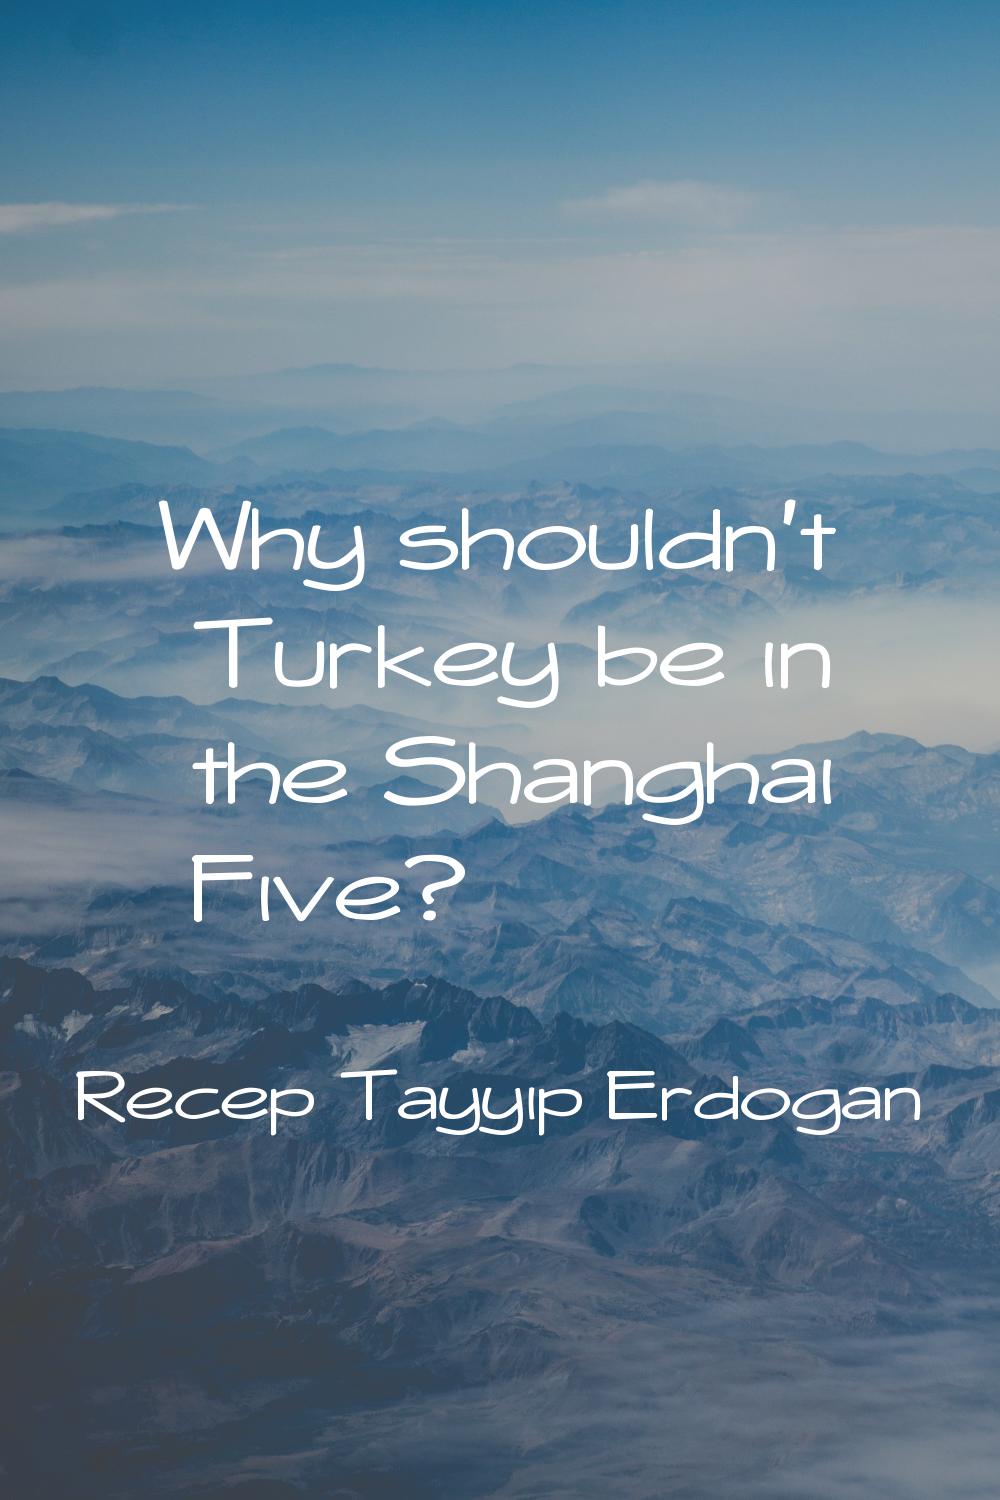 Why shouldn't Turkey be in the Shanghai Five?